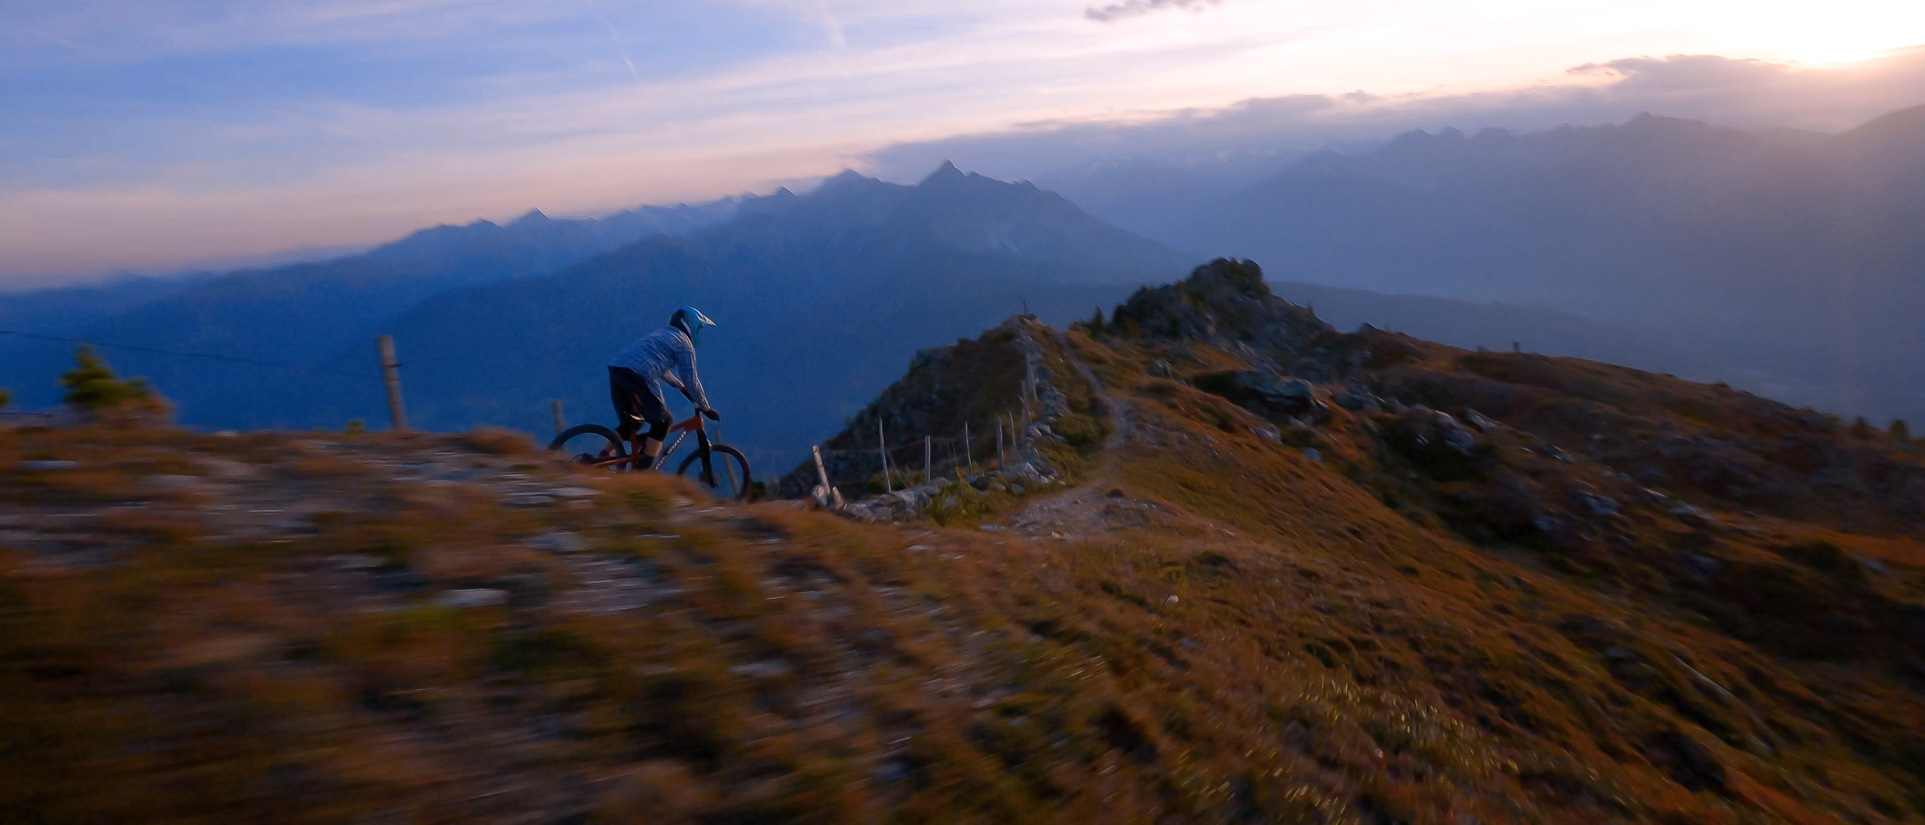 A mountainbike rider riding into the sunset in the mountains.